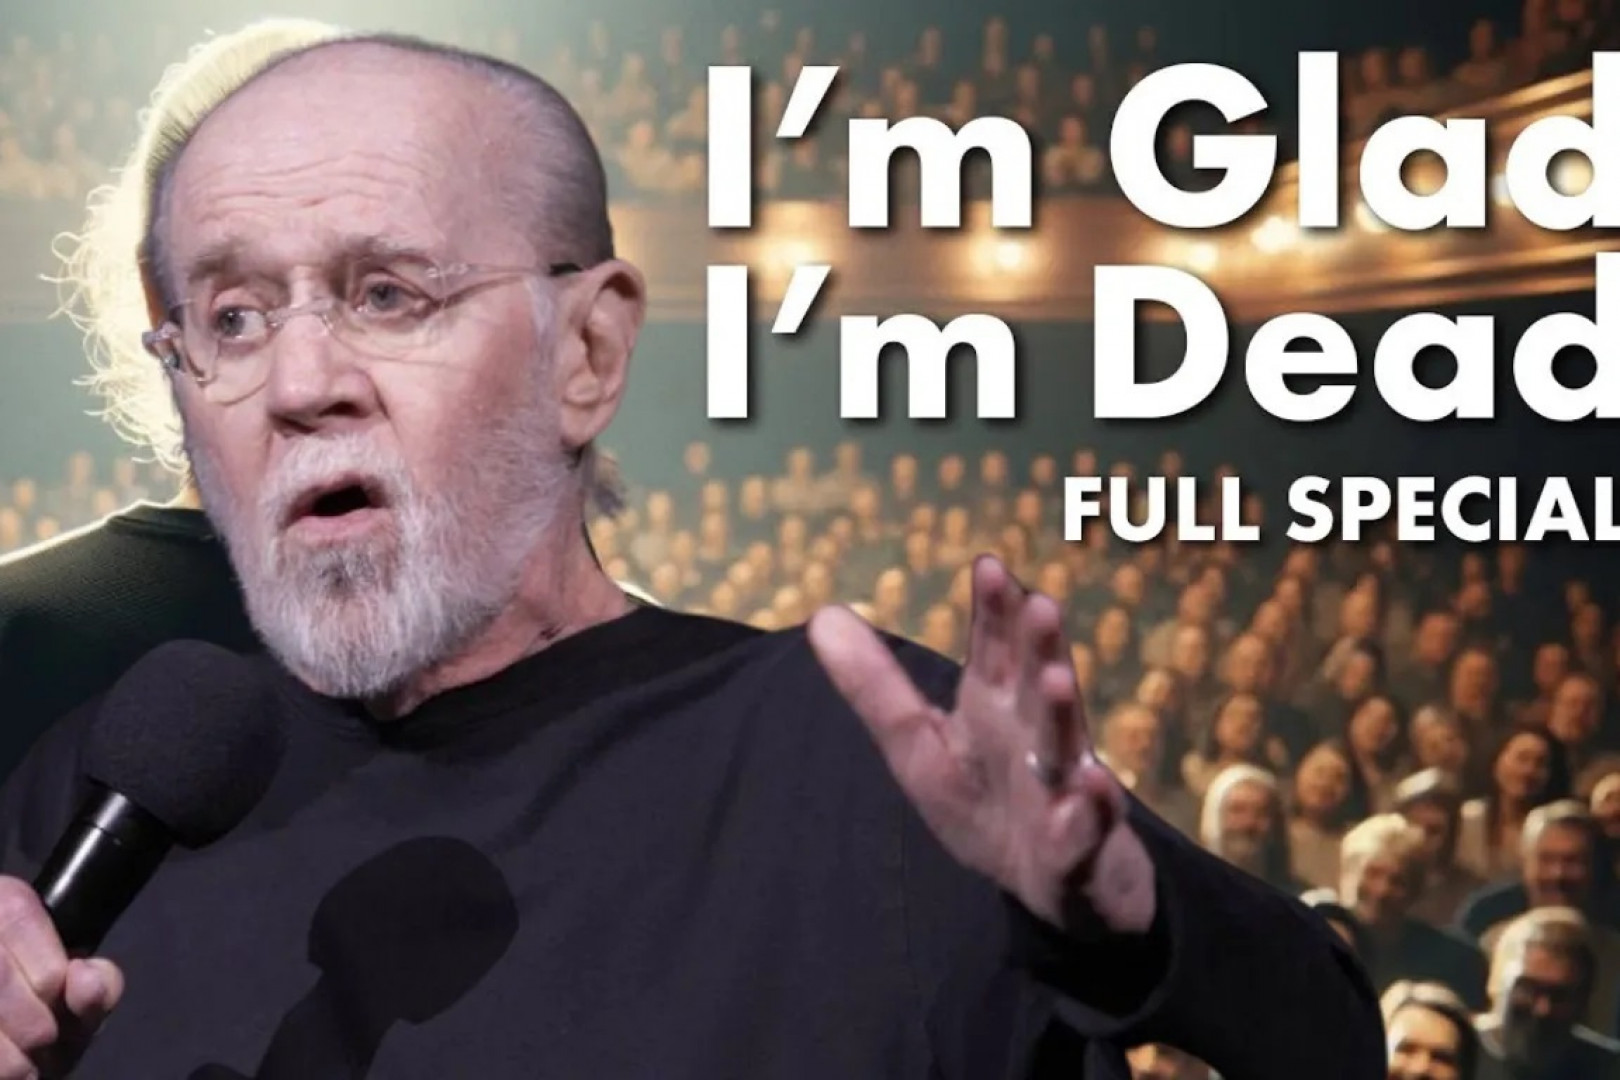 Dudesy creates George Carlin A.I. generated special without permission, Carlin Estate denounces